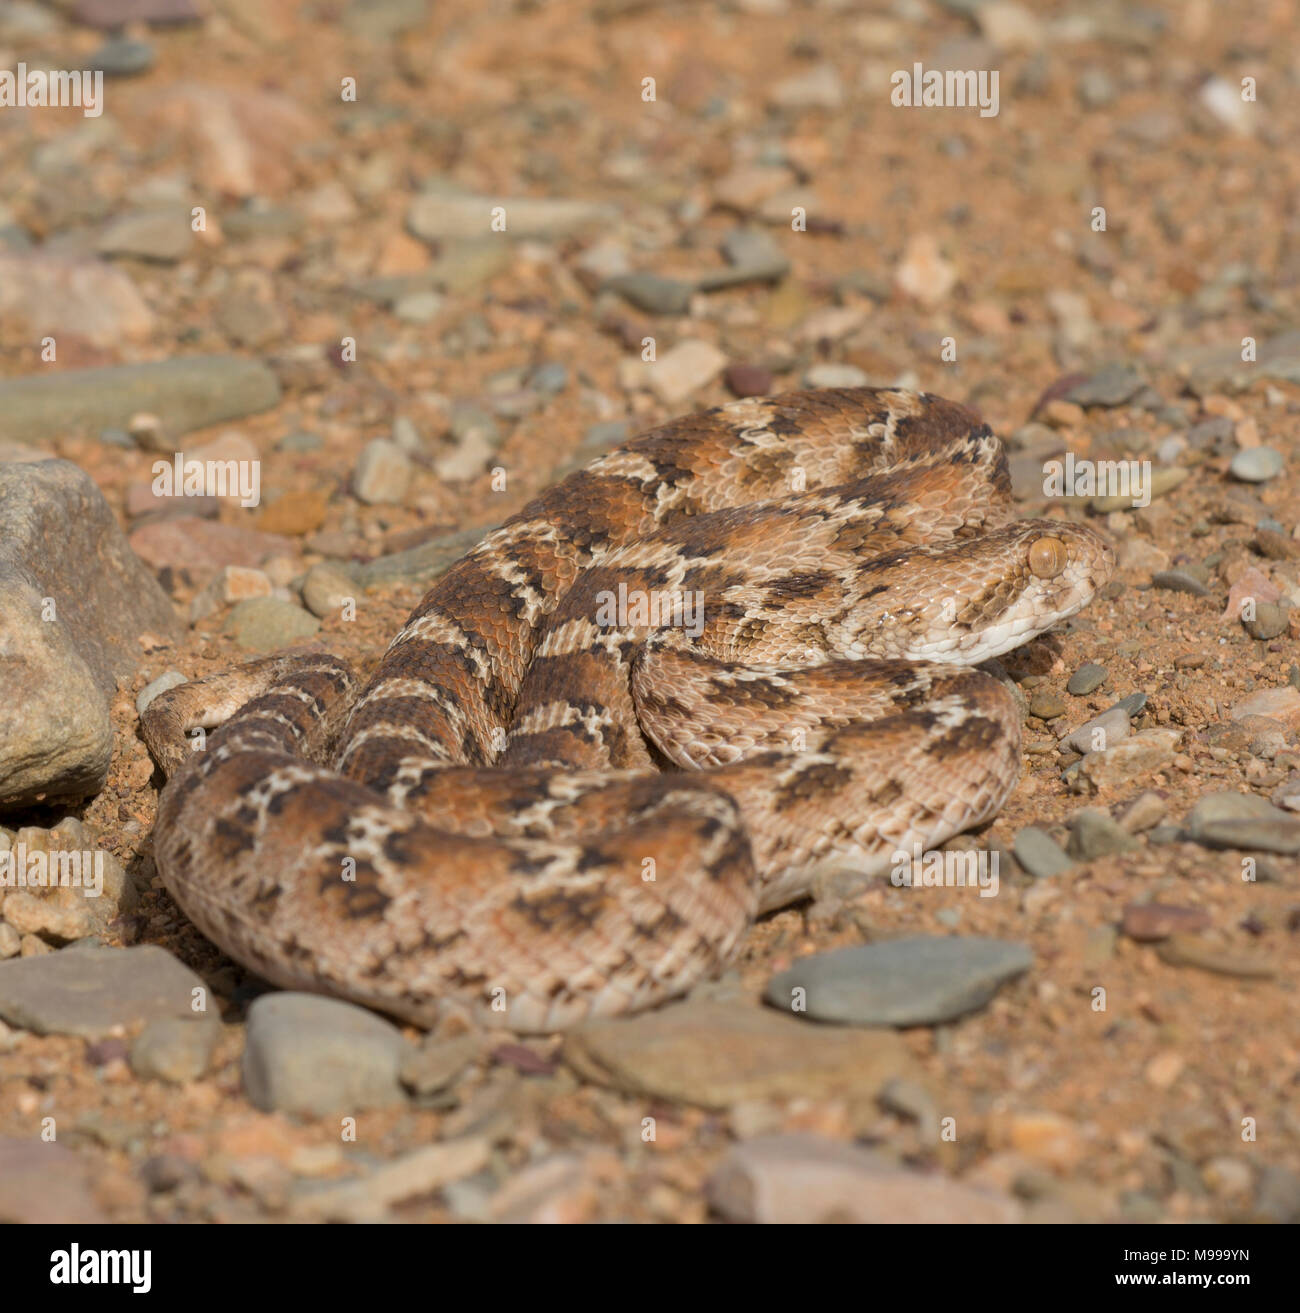 White Bellied Carpet Viper or North African Saw-Scaled Viper, (Echis leucogaster) in the desert of Morocco North Africa. Stock Photo